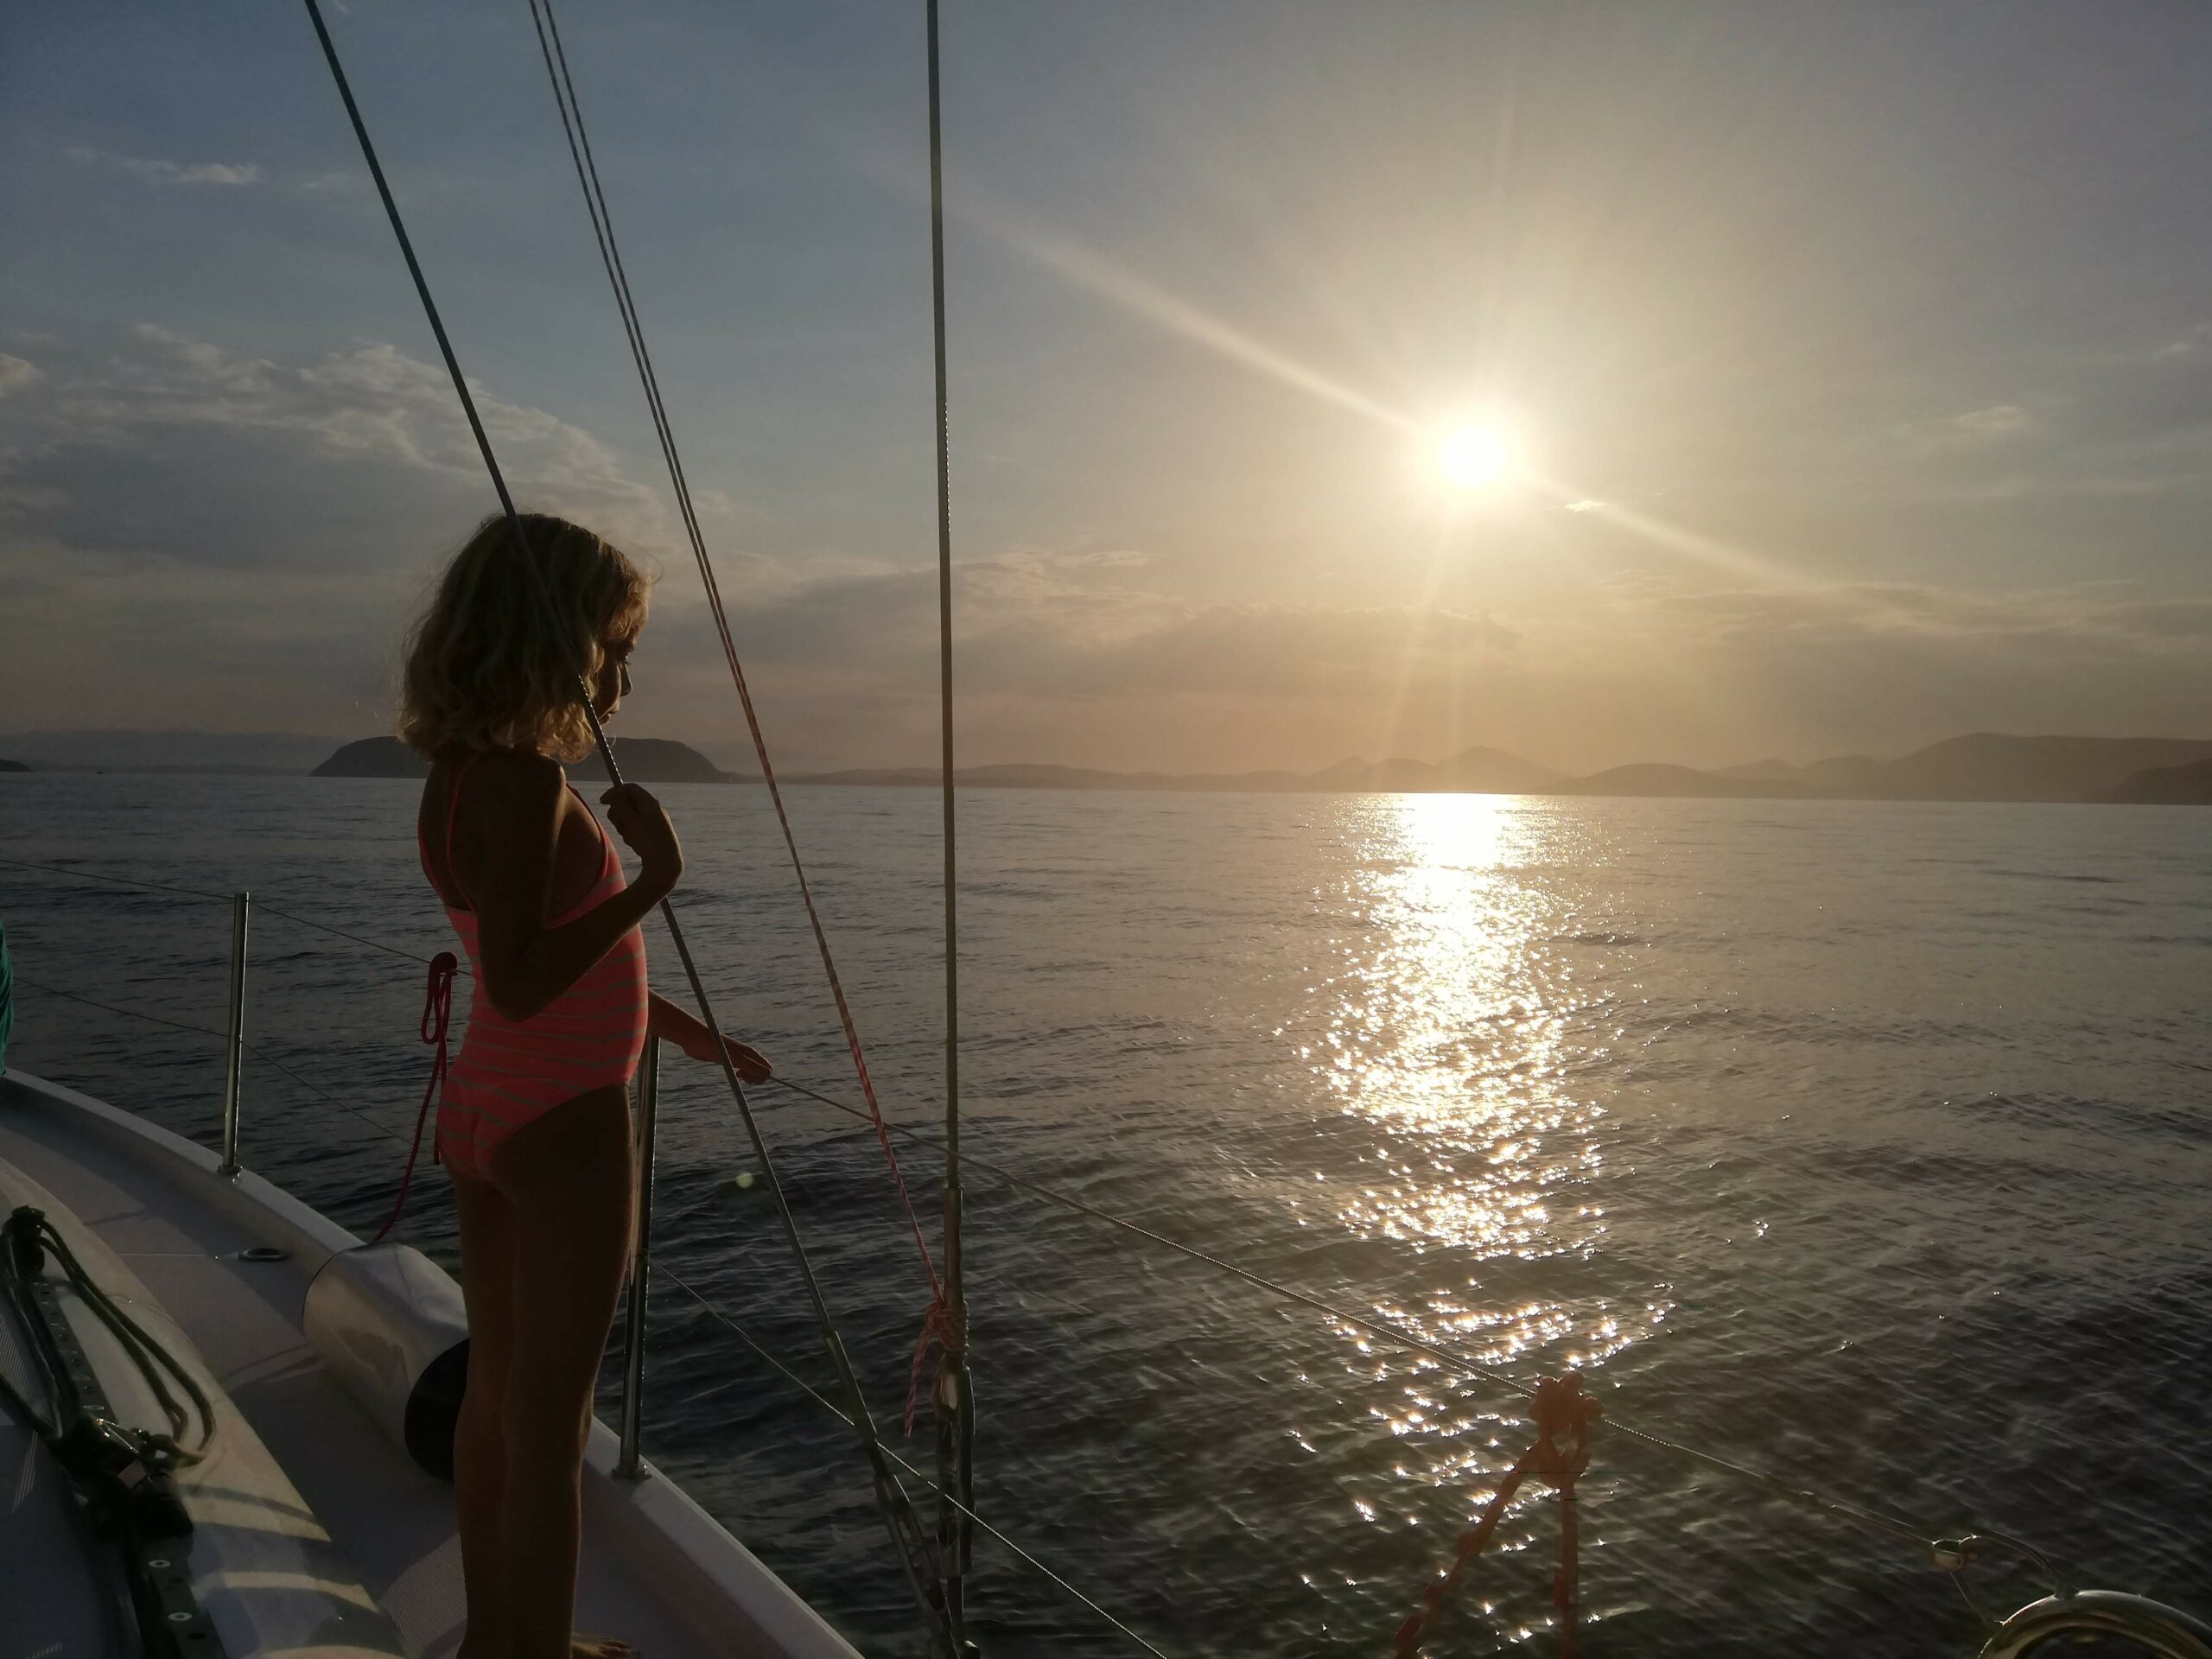 Sailing with Kids in Greece